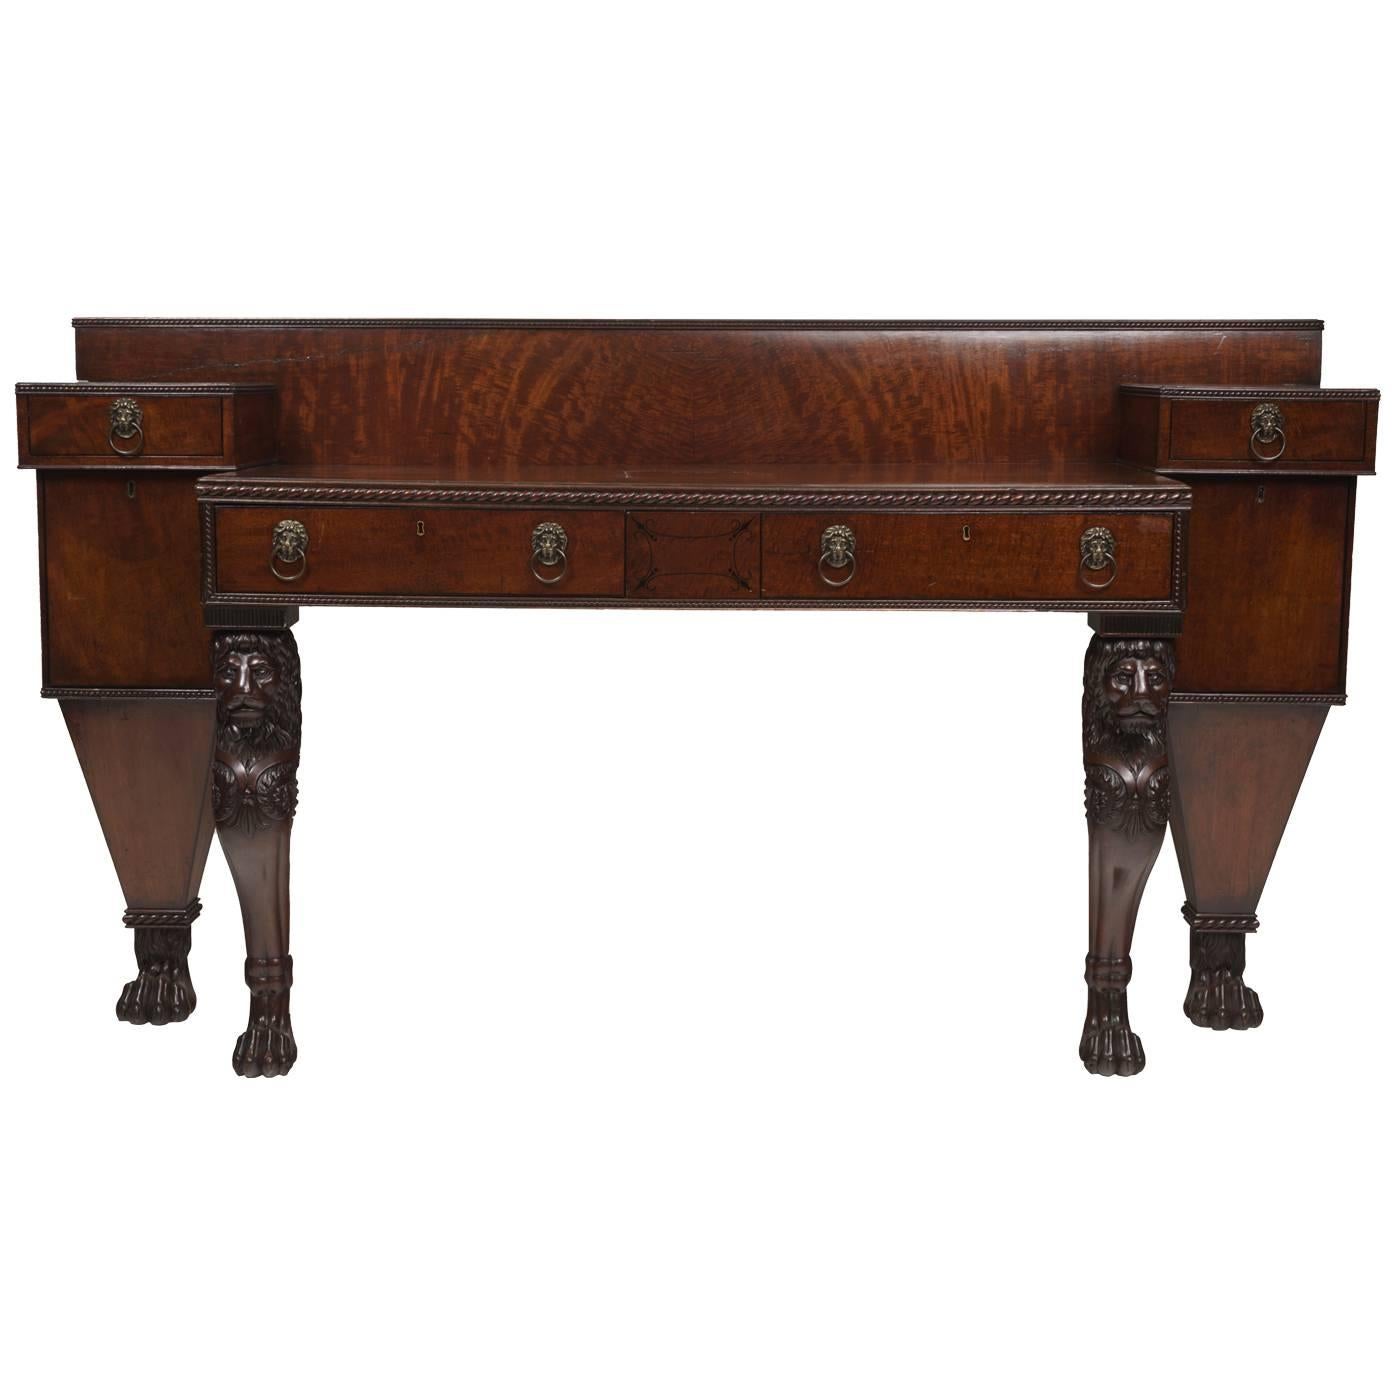 Mack, Williams and Gibton Mahogany Sideboard with Lion Monopodium Legs For Sale